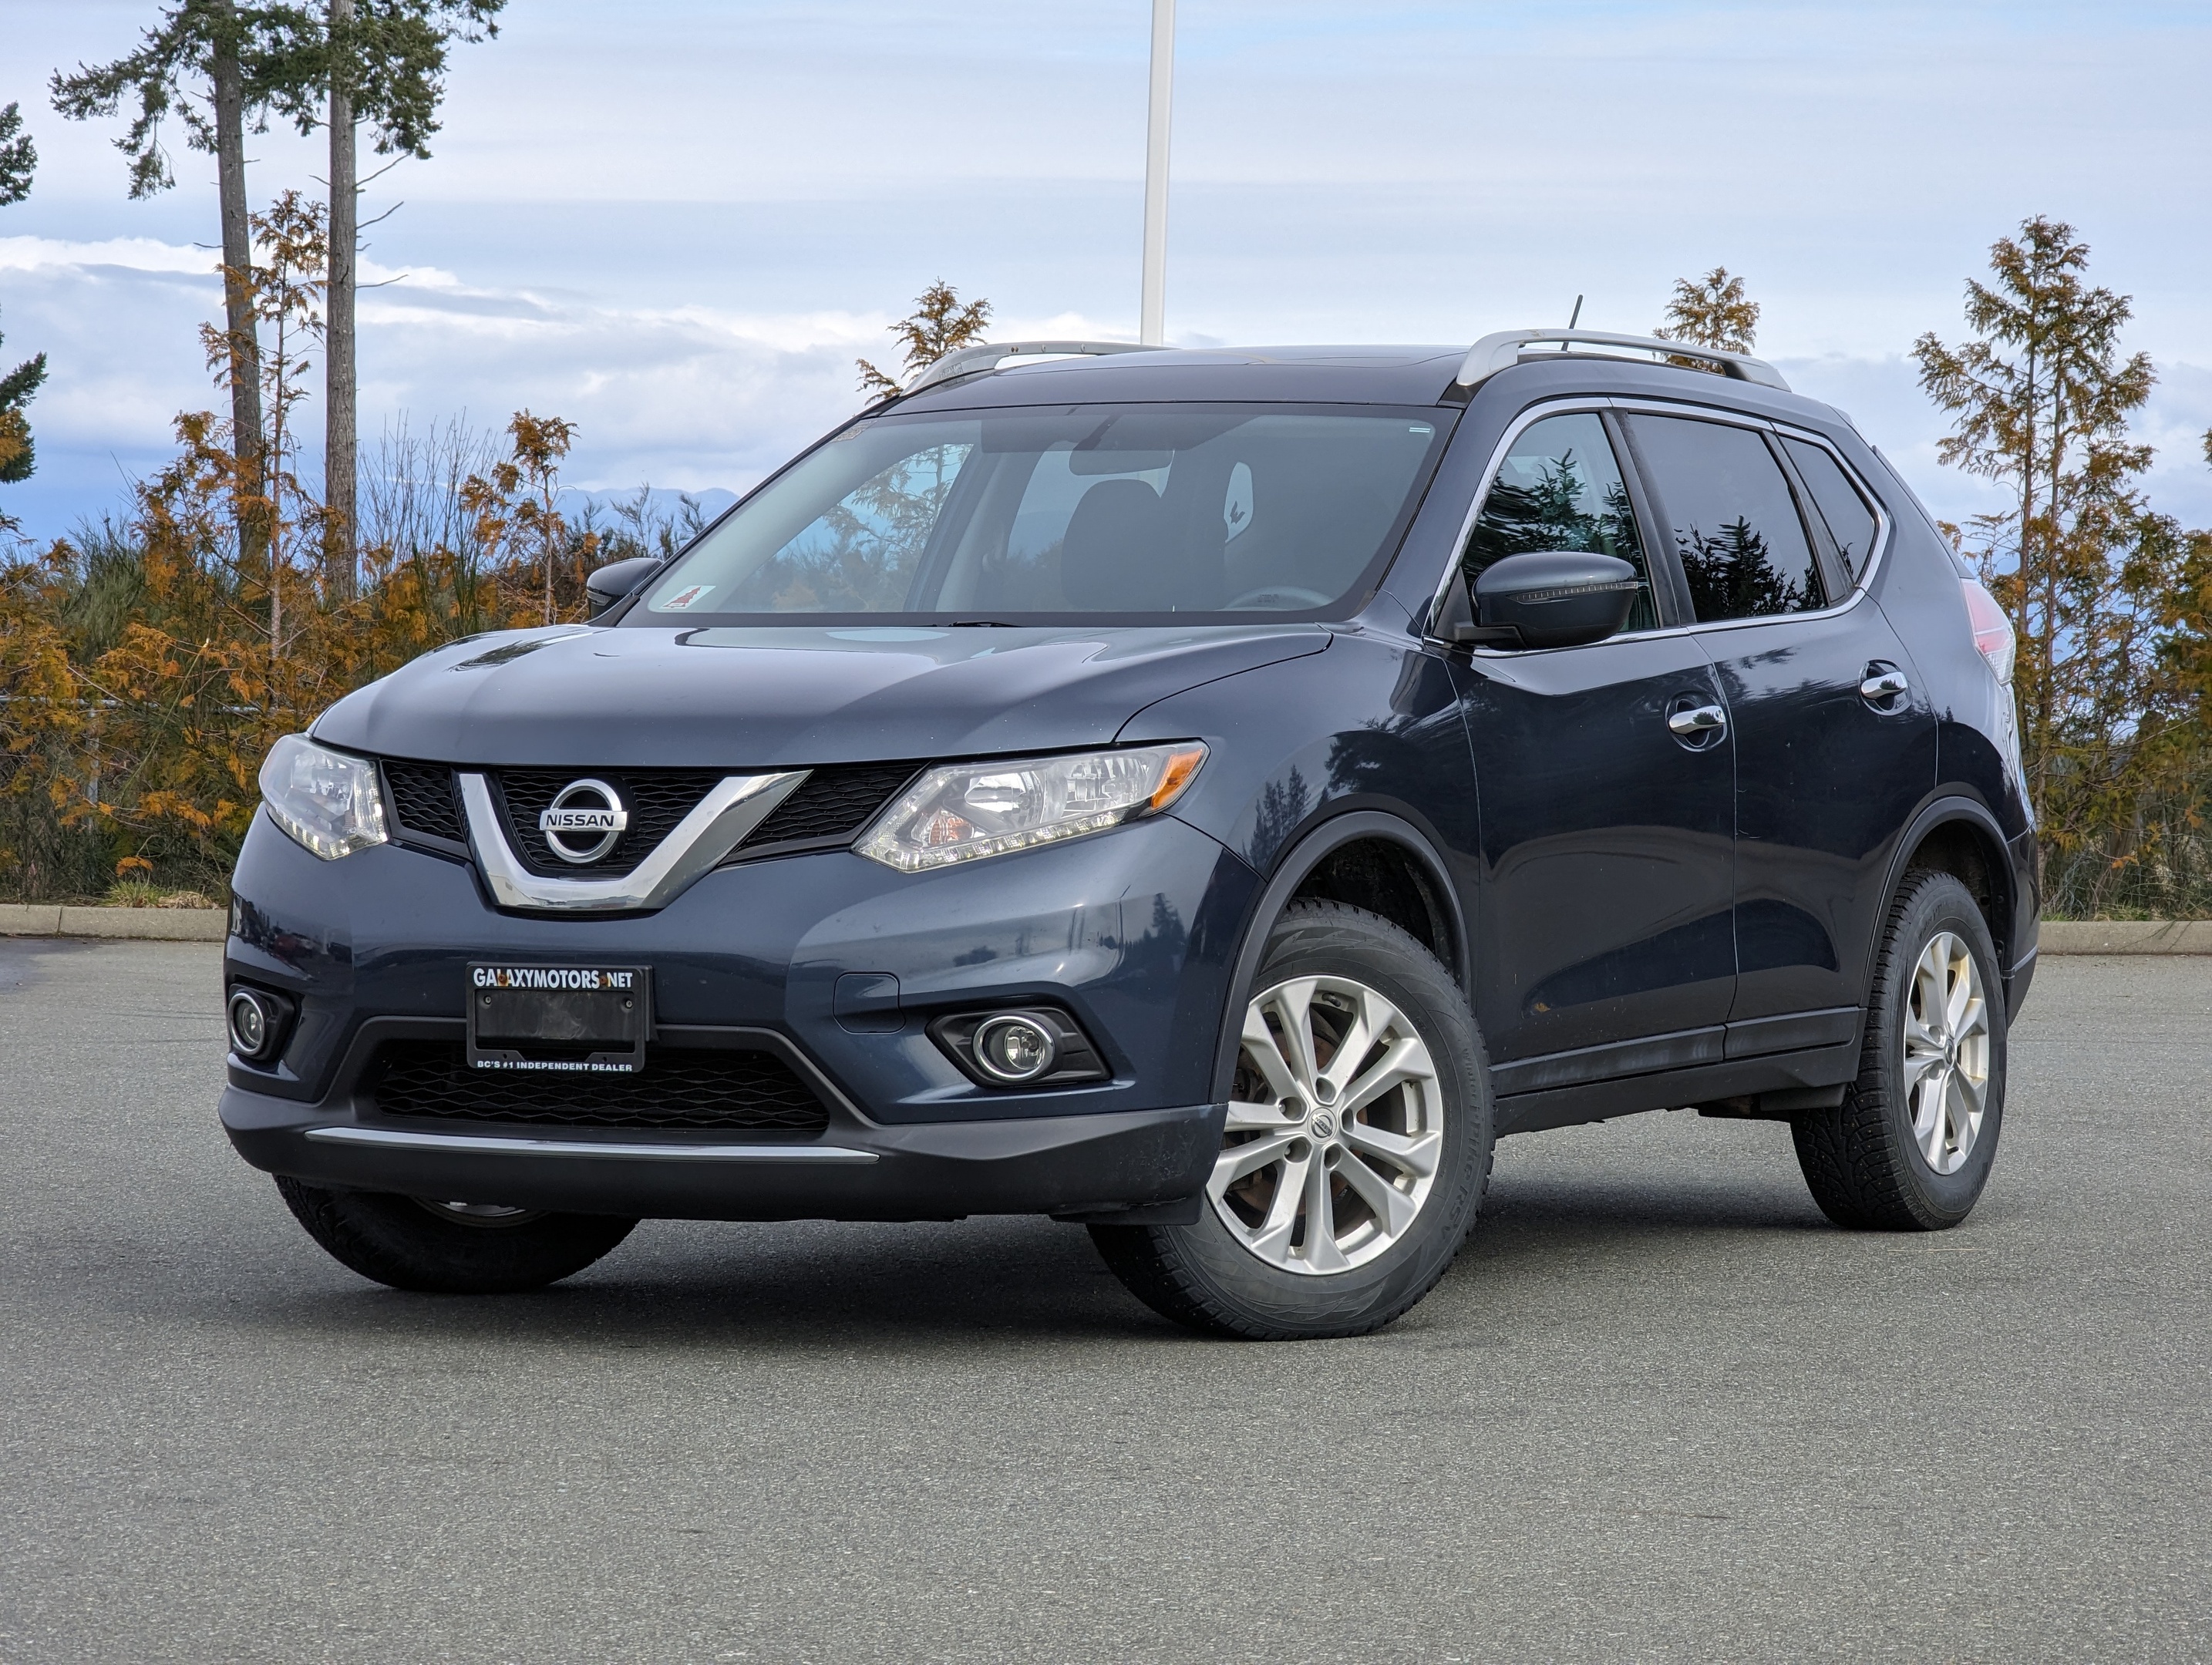 2016 Nissan Rogue SV - No Accidents, AWD, Heated Seats